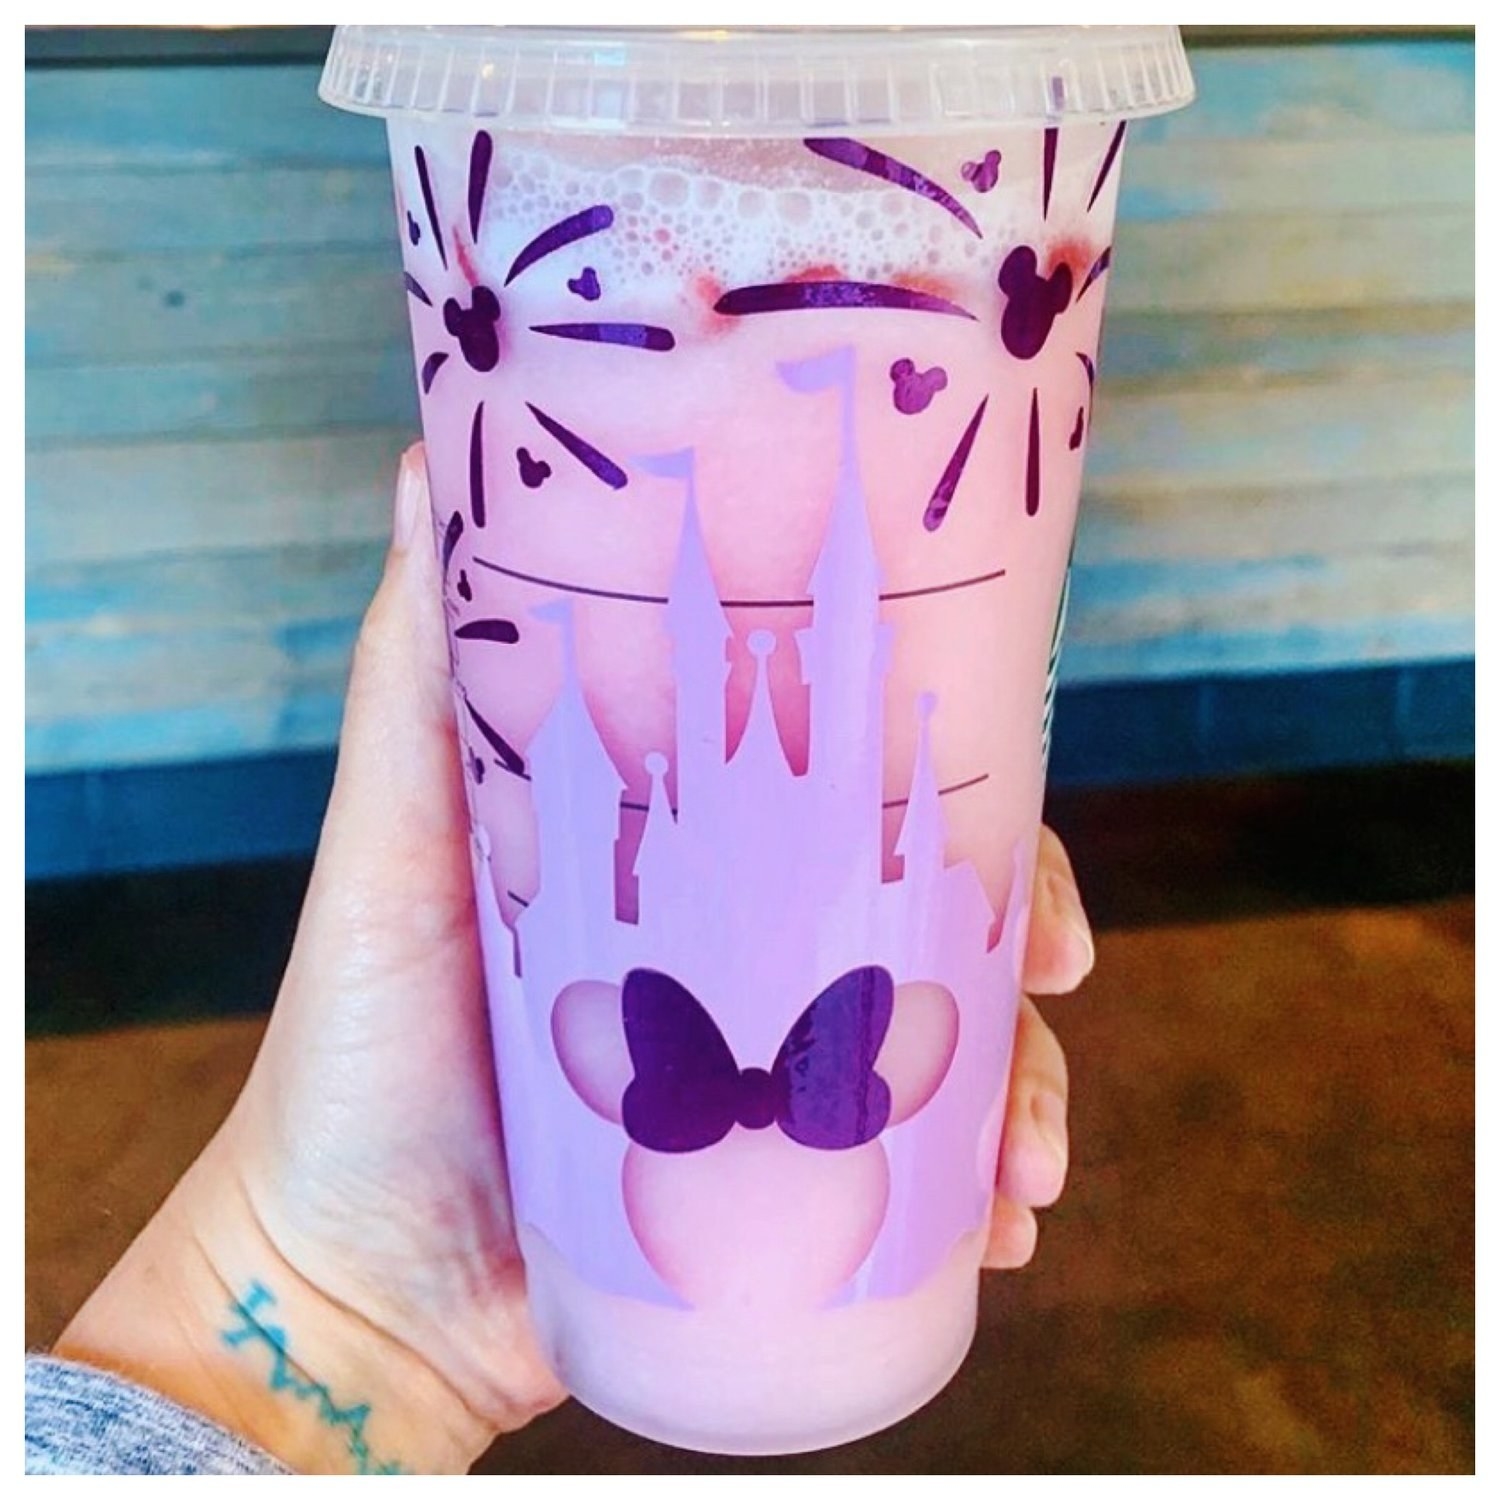 A model holding a clear Starbucks cold cup with a purple Disney castle and Minnie Mouse design on it 